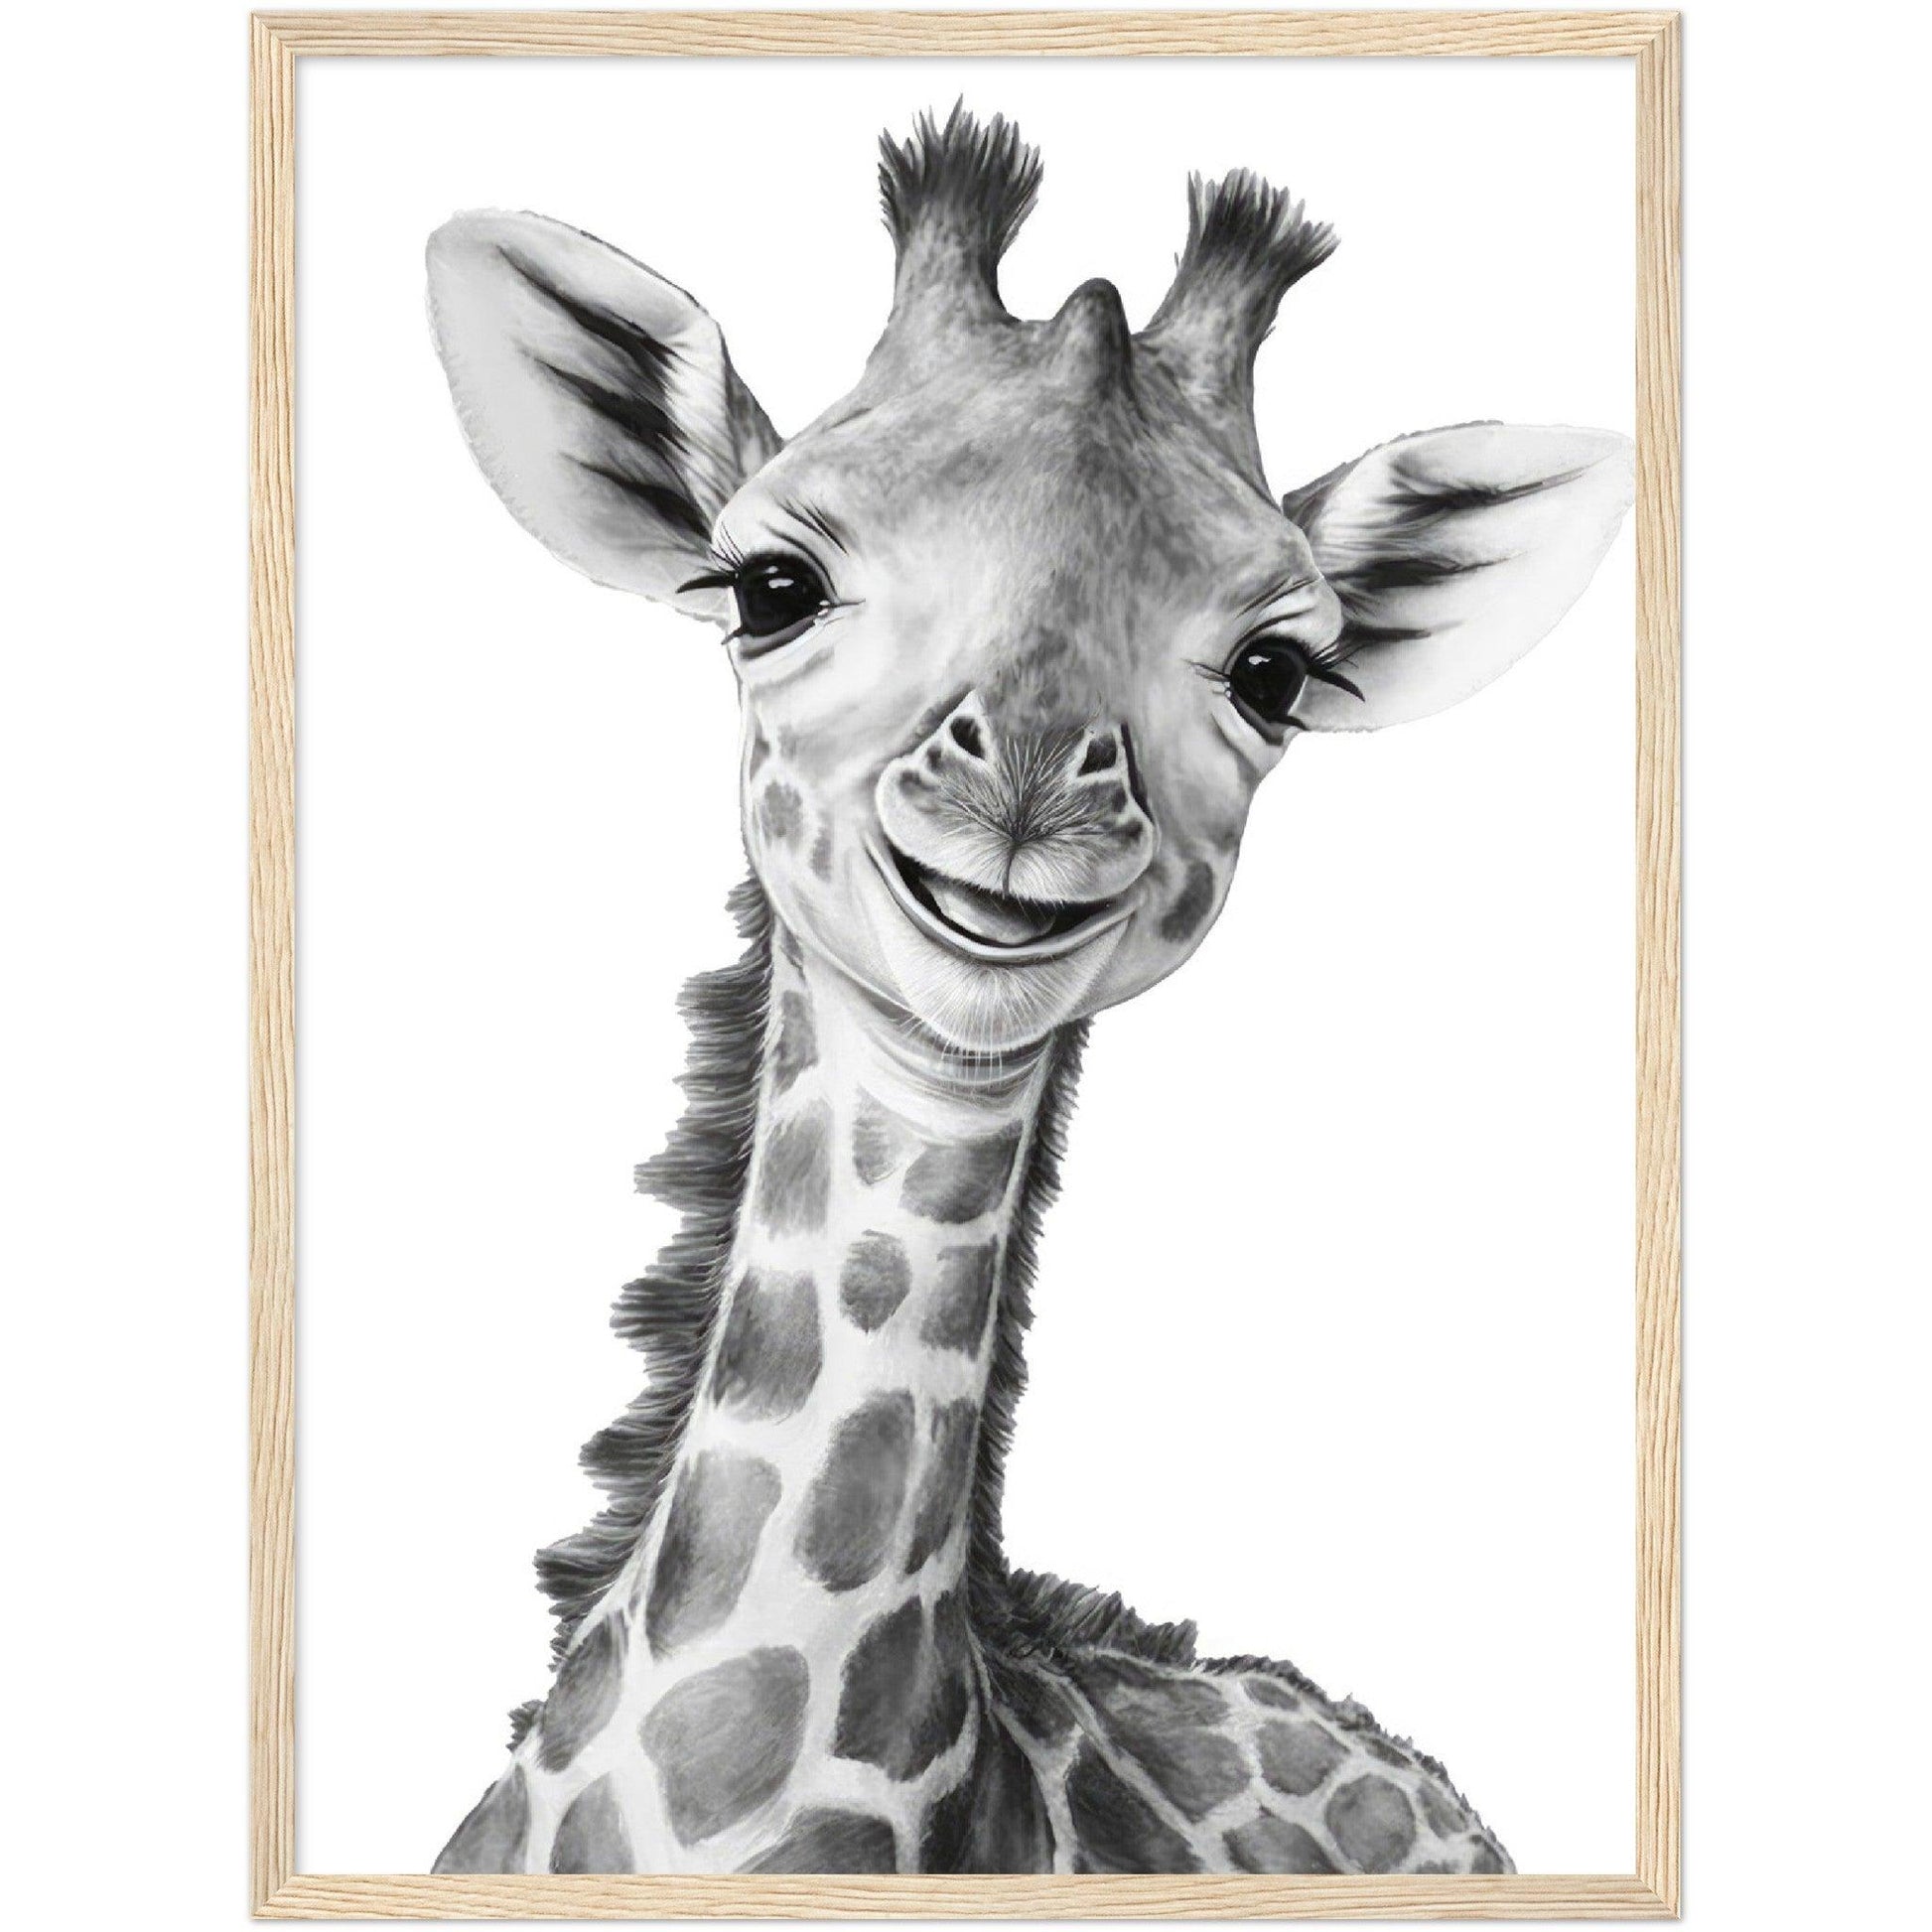 Baby Giraffe Drawing - By Masters in Art - Masters in Art